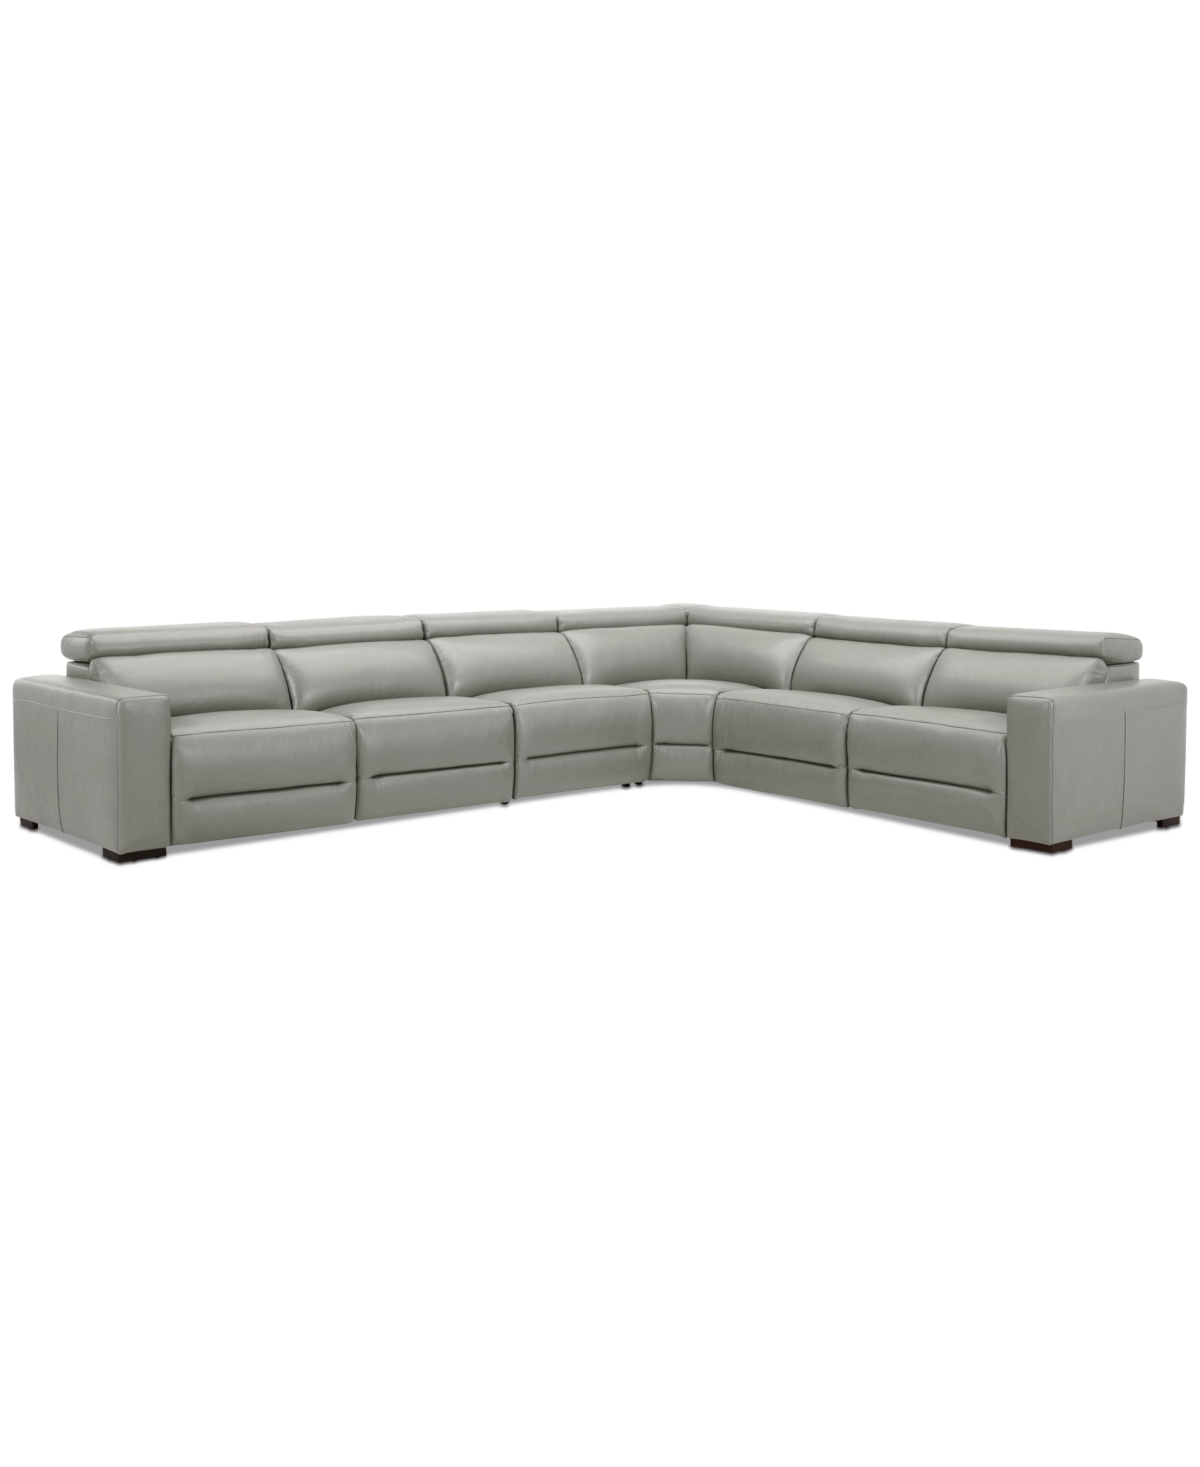 Macy's Nevio 157" 6-pc. Leather Sectional With 3 Power Recliners And Headrests, Created For  In Light Grey